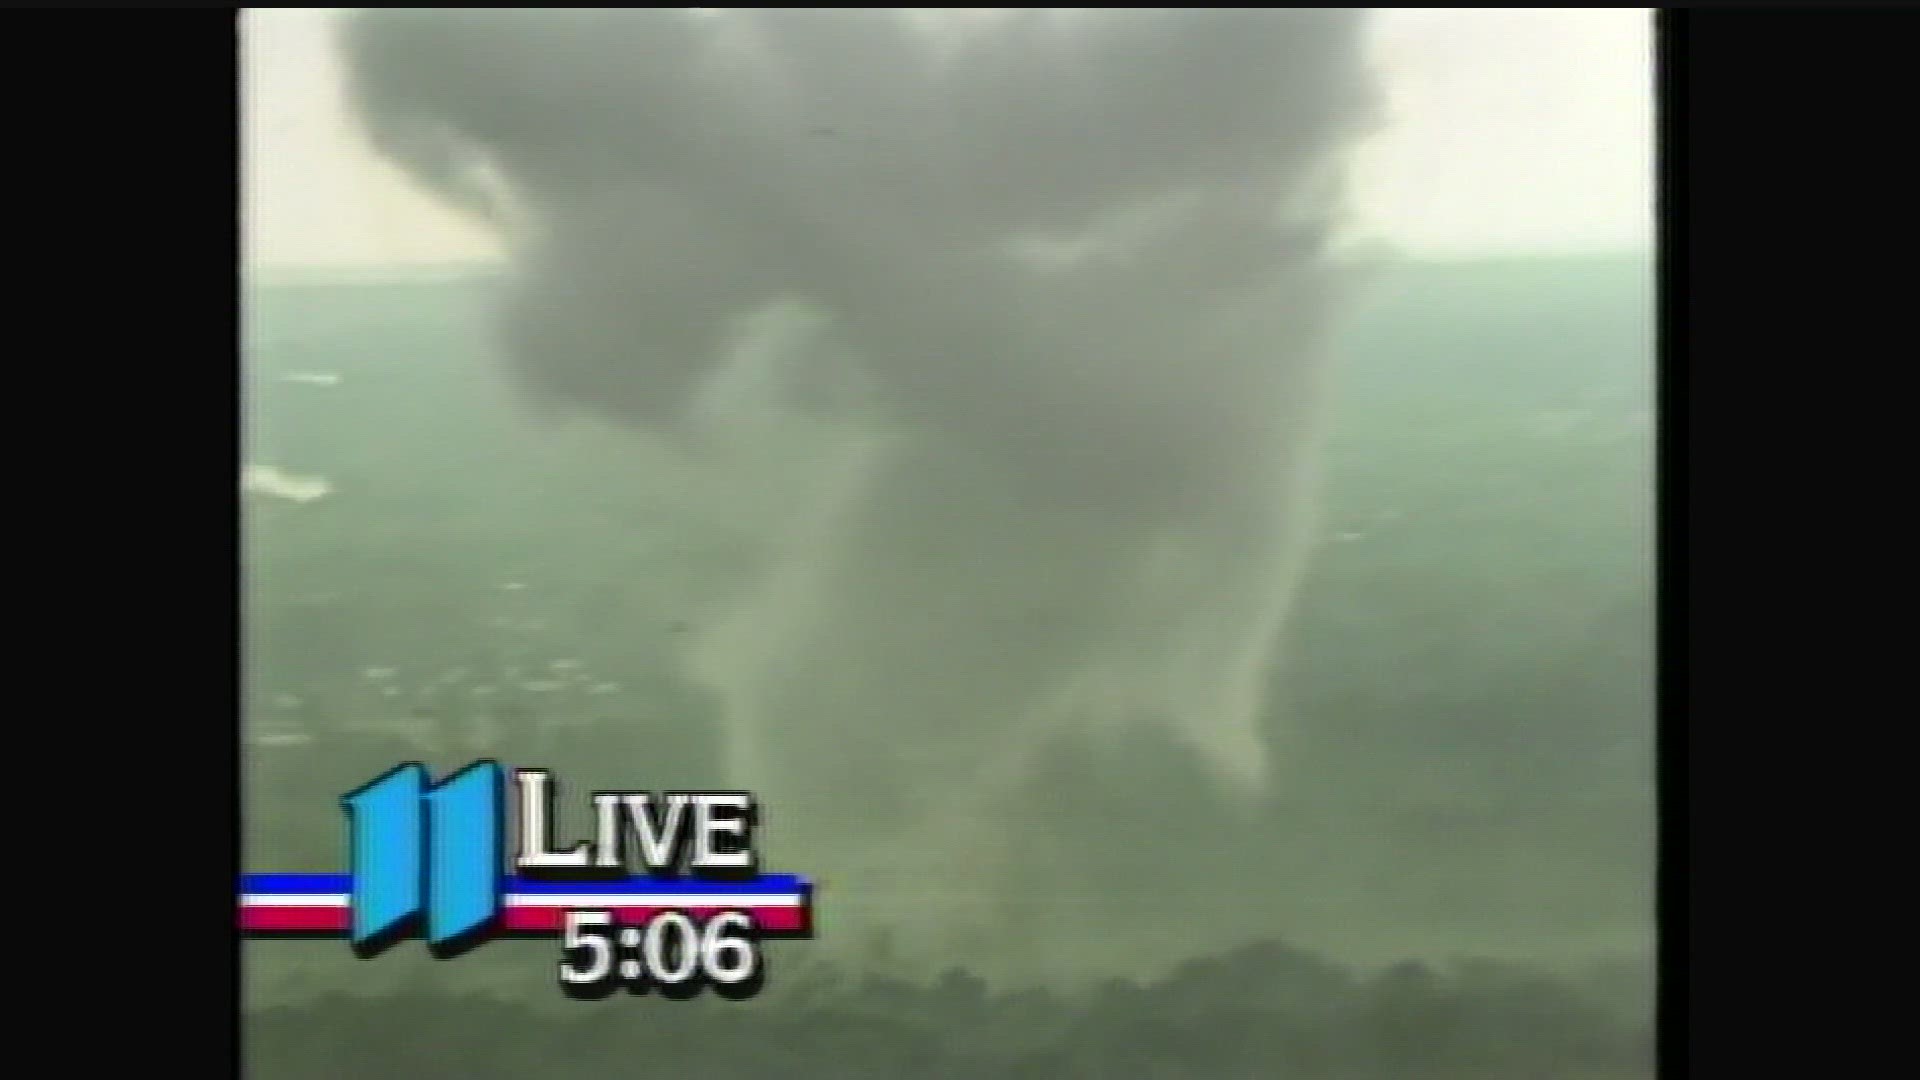 Sky 11 captured an incredible, close-up shot of the tornado from the air in Fridley.